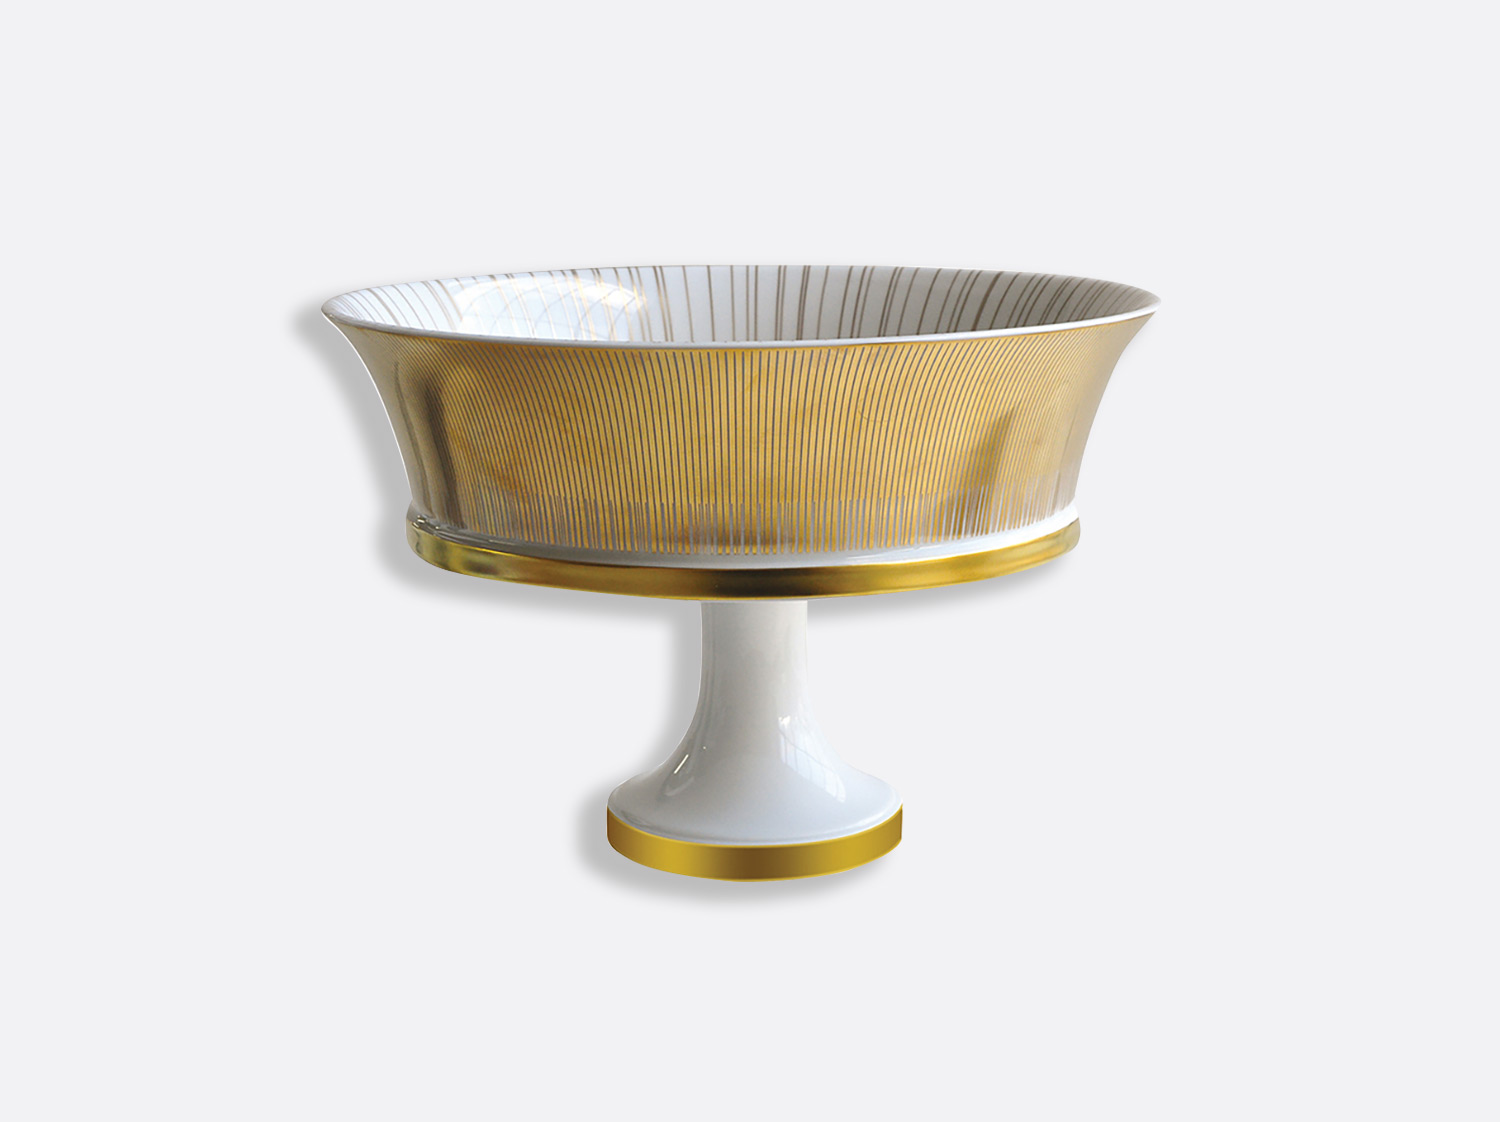 Footed Cake Stand